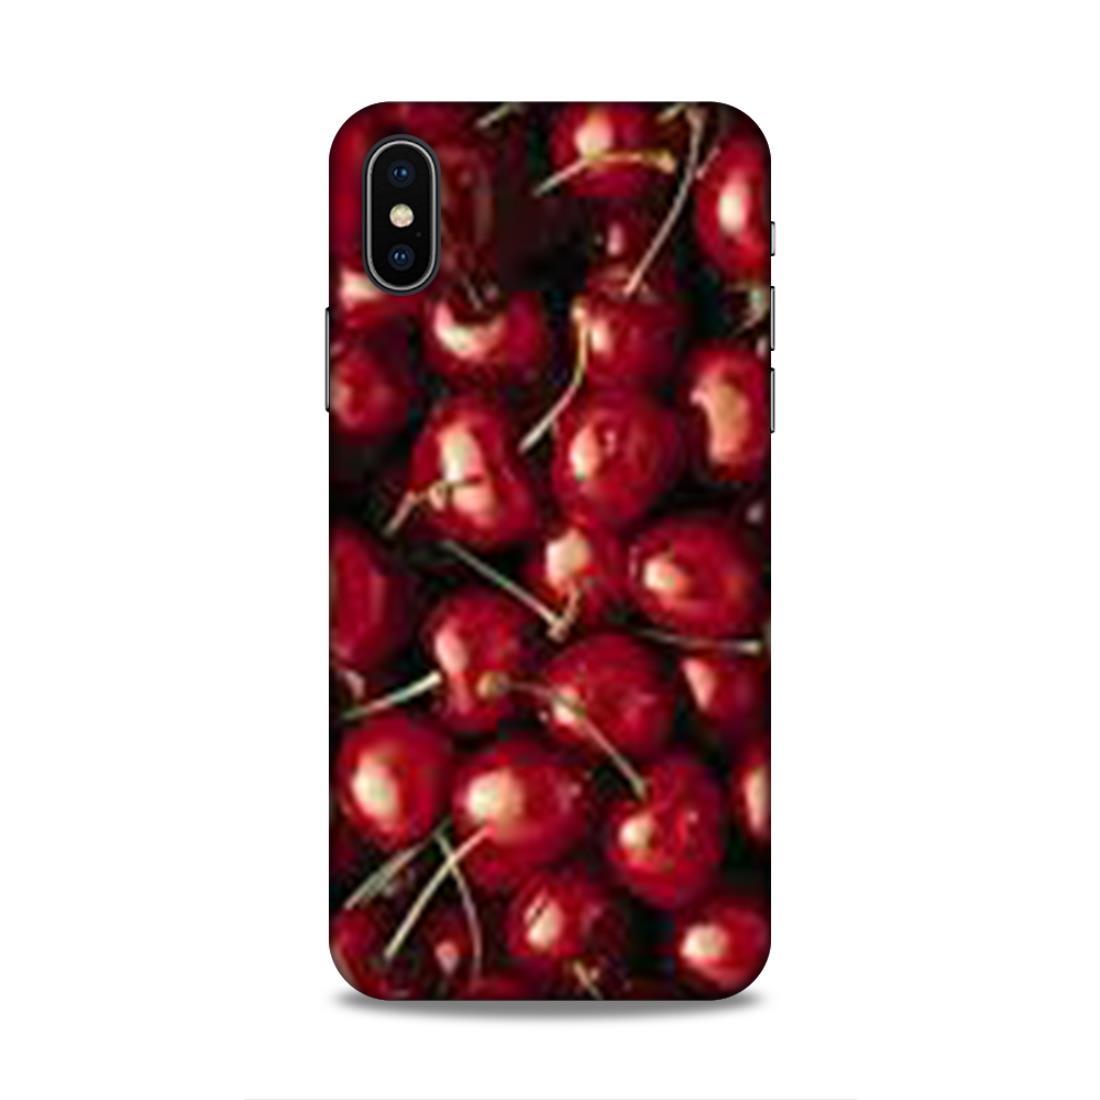 Red Cherry Love iPhone X Mobile Cover Case